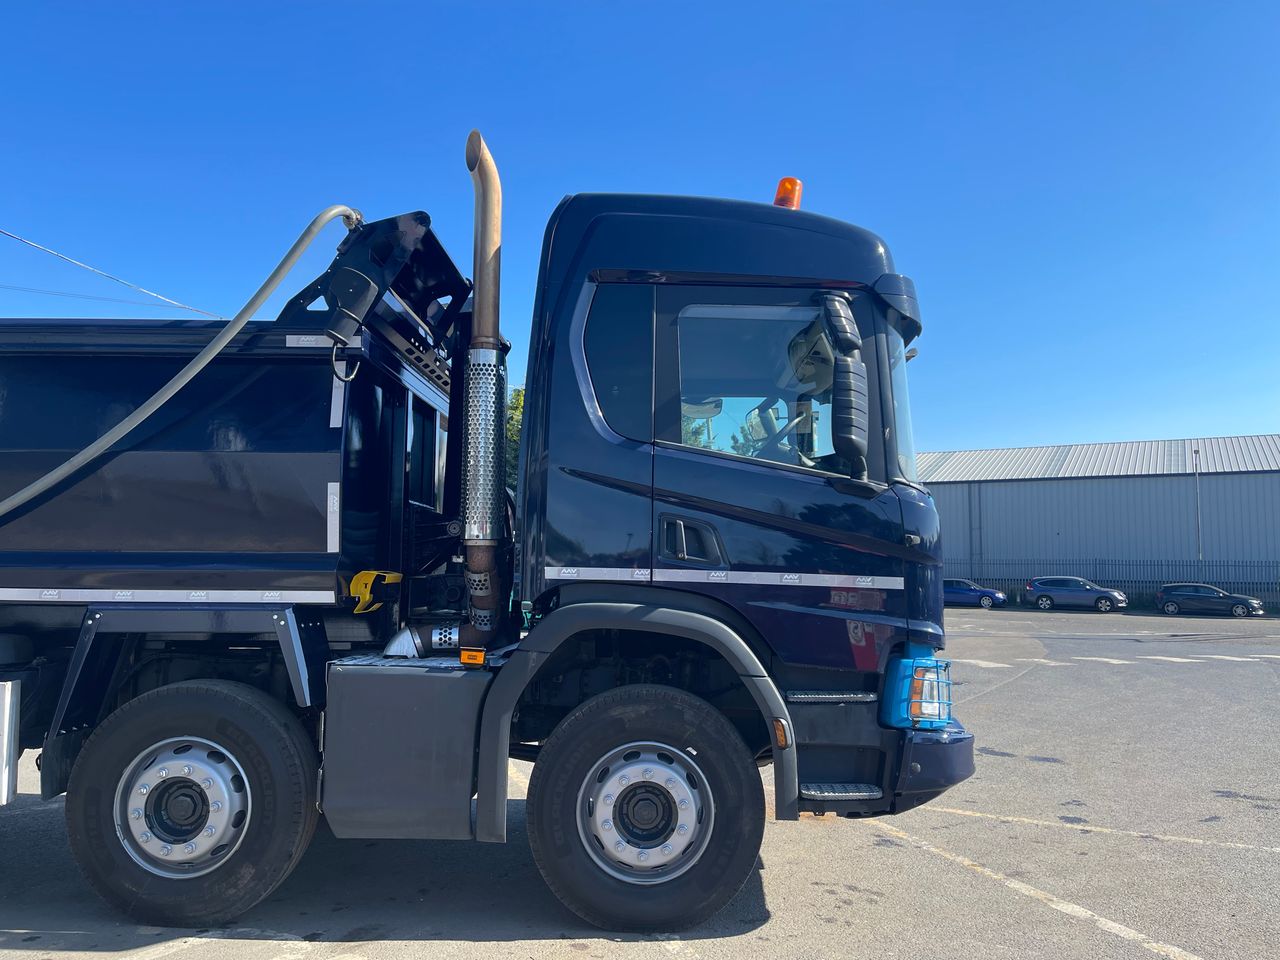 Ready to go Scania P410 XT, Tipper, 410, 32 Tonne, Day Cab, Automatic, Thompson Body with Easy Sheet, Beacons, High Ground Clearance, HYVA Ram, Air Tailgate, , -, - | for sale at MV Commercial, the UKs leading Truck, Trailers and Van supplier. (SM19BYL 348992)